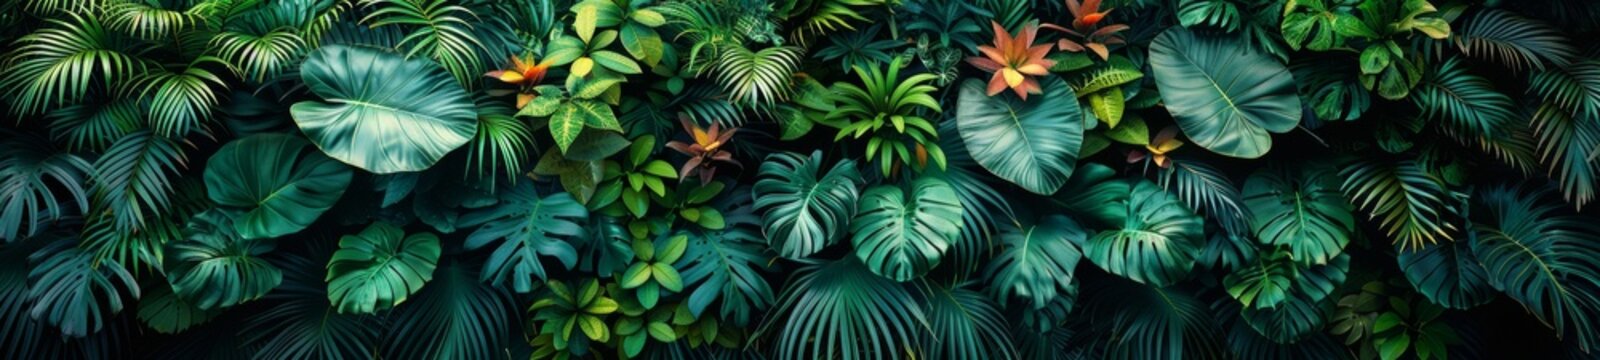 Against the verdant backdrop, the tropical flowers' vibrant hues create a striking visual feast, their colors popping against the lush green foliage like splashes of paint on a fresh canvas.